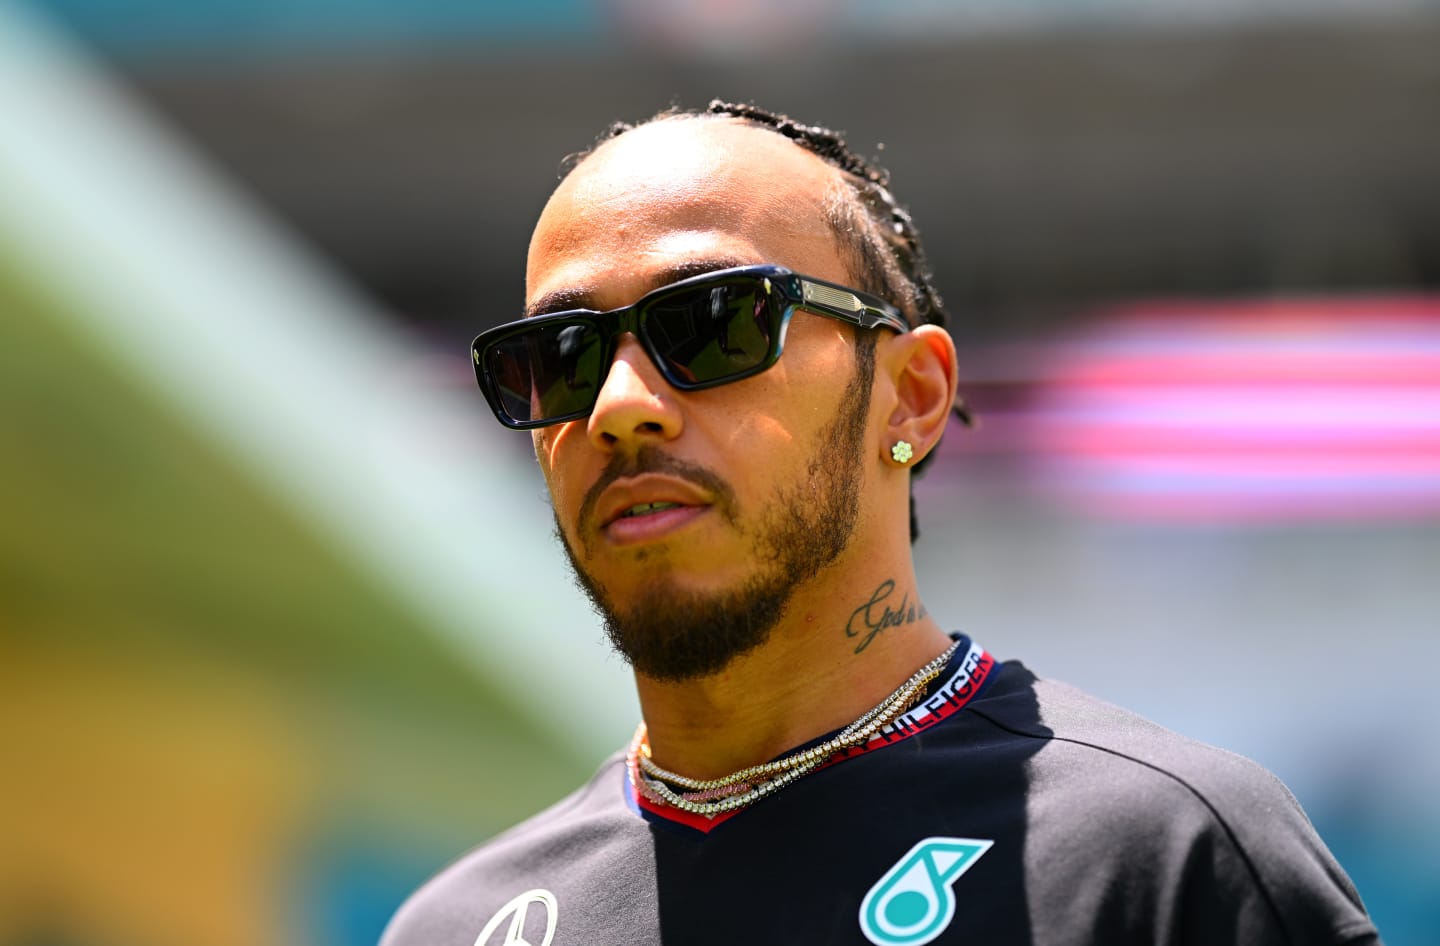 MIAMI, FLORIDA - MAY 02: Lewis Hamilton of Great Britain and Mercedes looks on in the Paddock